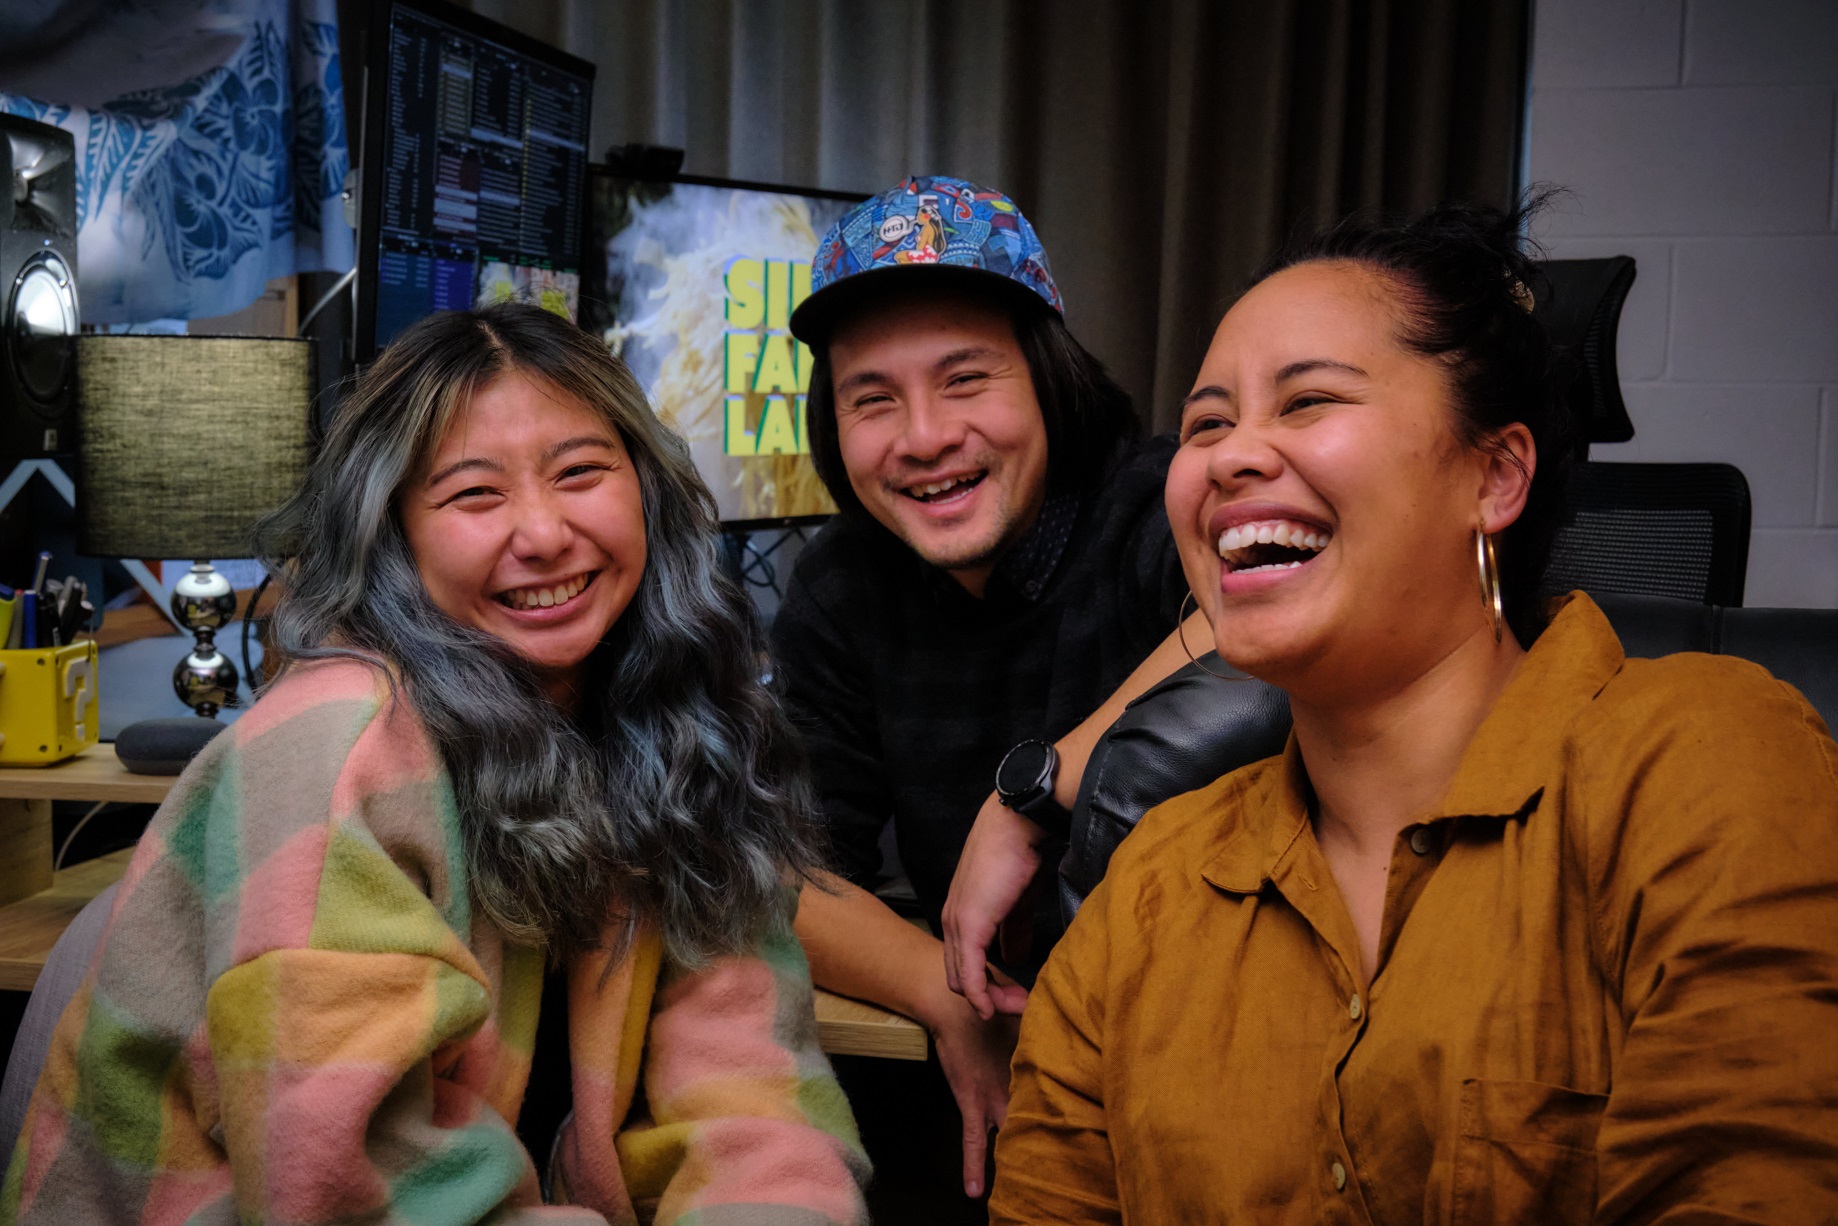 Sik Fan Lah! writer Jack Woon, centre, with producers Jess Wong, left, and Abba-Rose Vaiaoga-Ioasa.